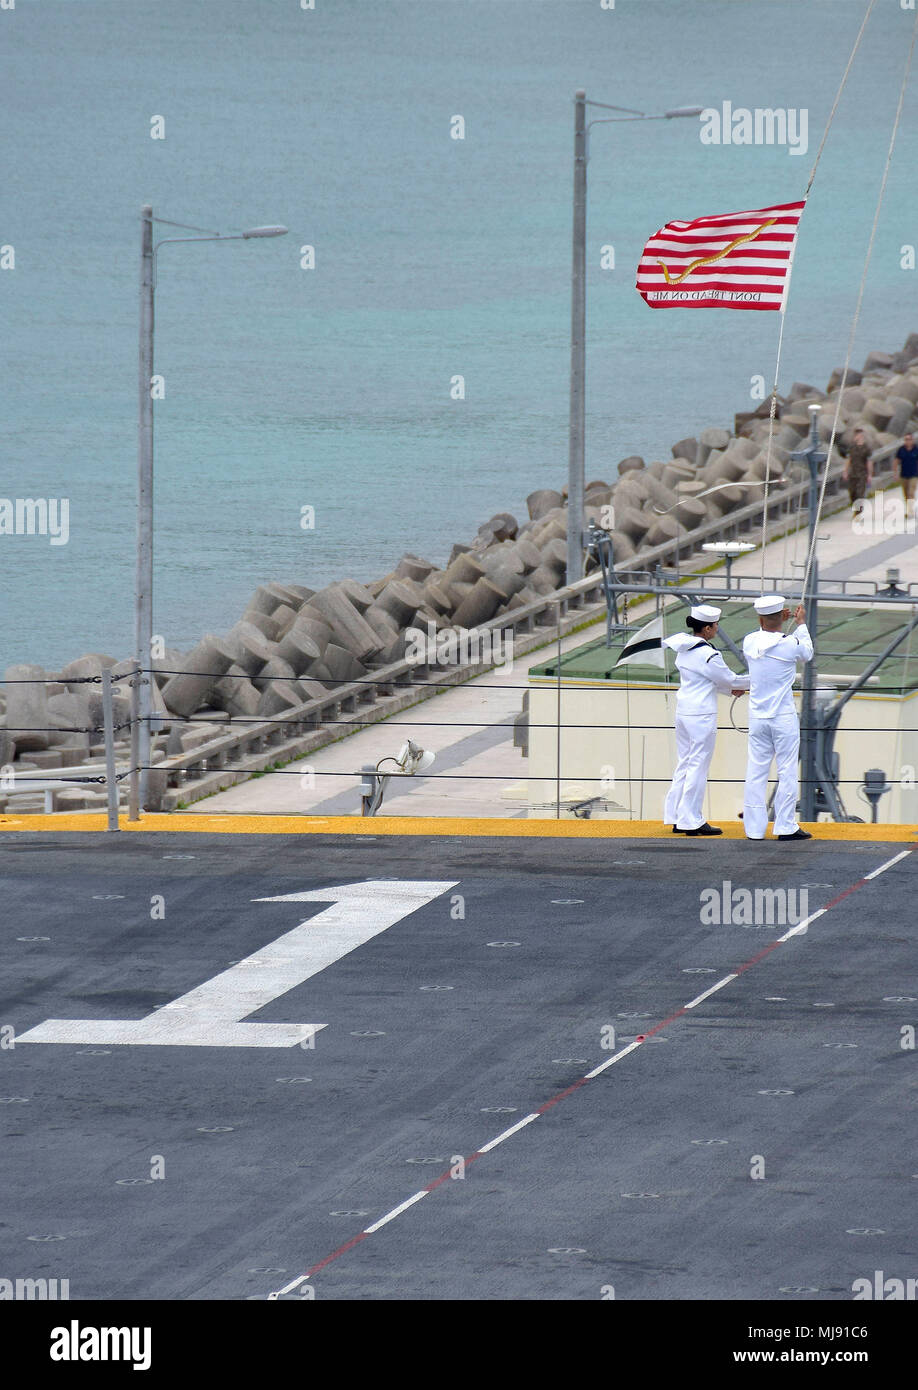 180421-N-RI884-0322 PHILIPPINE SEA (April 21, 2018) Sailors aboard the amphibious assault ship USS Wasp (LHD 1) moor ship's colors as the ship arrives in Okinawa to disembark the 31st Marine Expeditionary Unit. Wasp, part of the Wasp Expeditionary Strike Group, has been operating with the MEU for nearly two months as part of a routine patrol in the Indo-Pacific. (U.S. Navy photo by Mass Communication Specialist 1st Class Daniel Barker/Released) Stock Photo